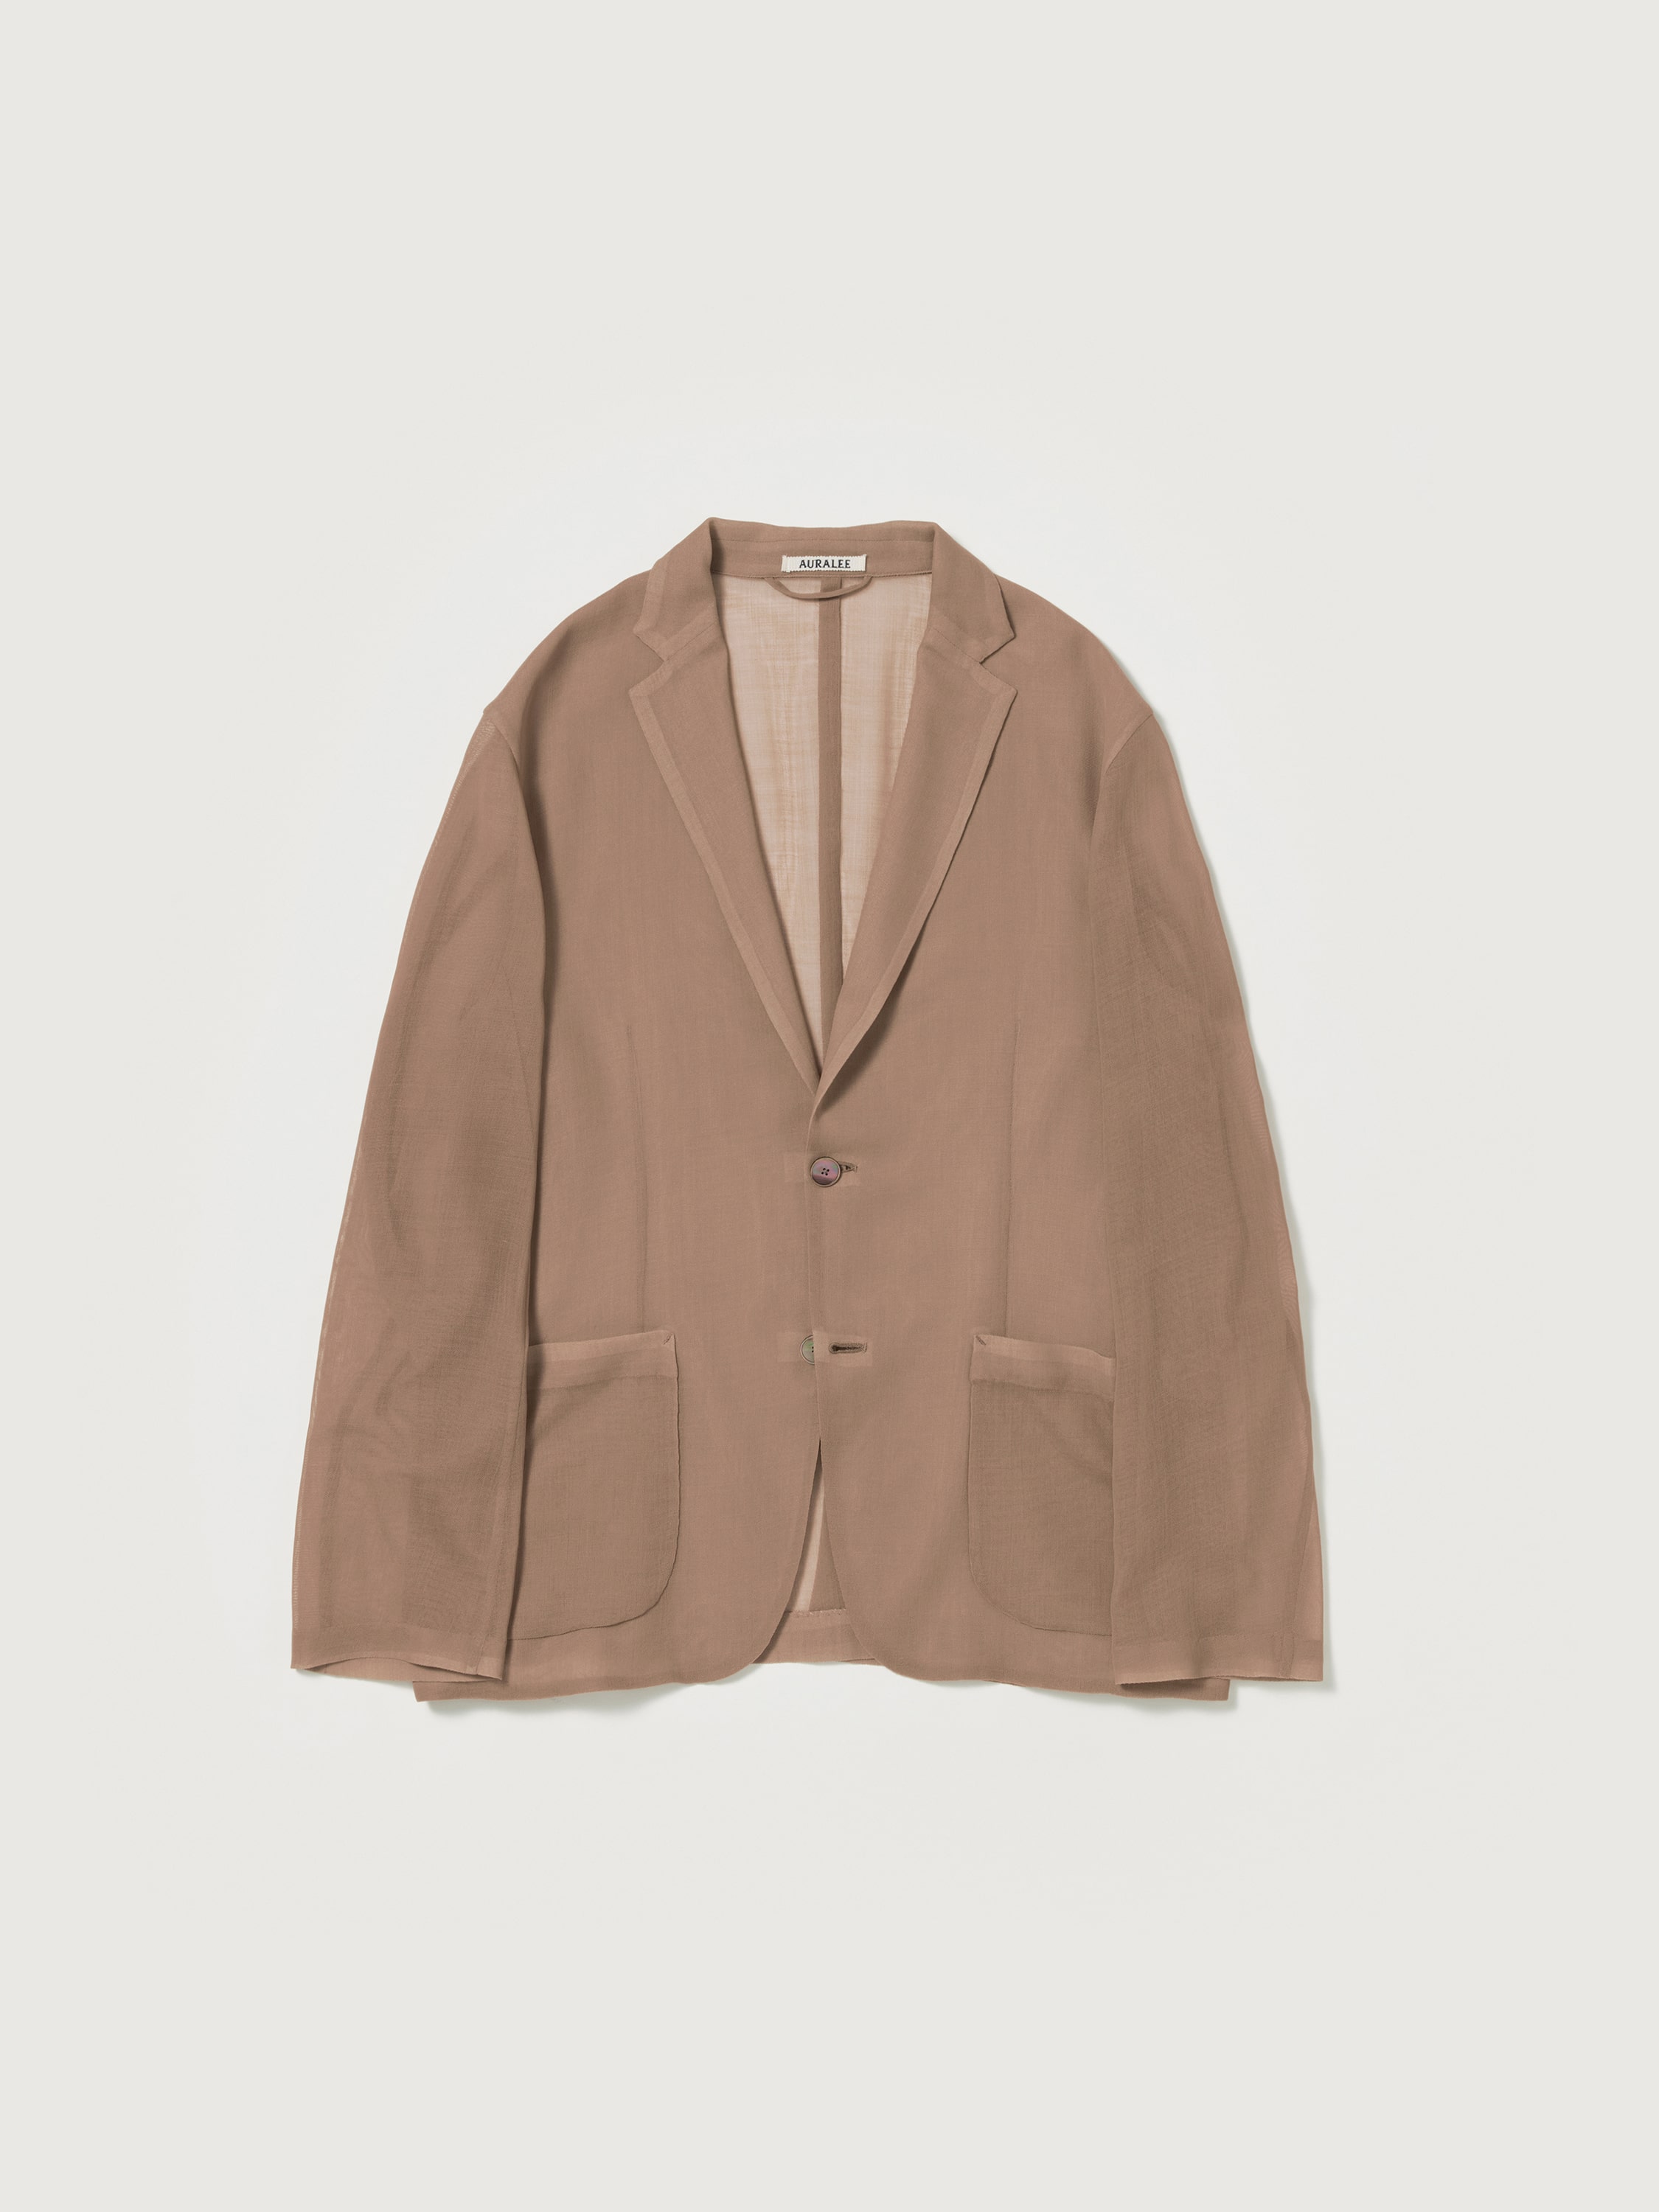 WOOL RECYCLE POLYESTER LENO SHEER JACKET - AURALEE Official Website